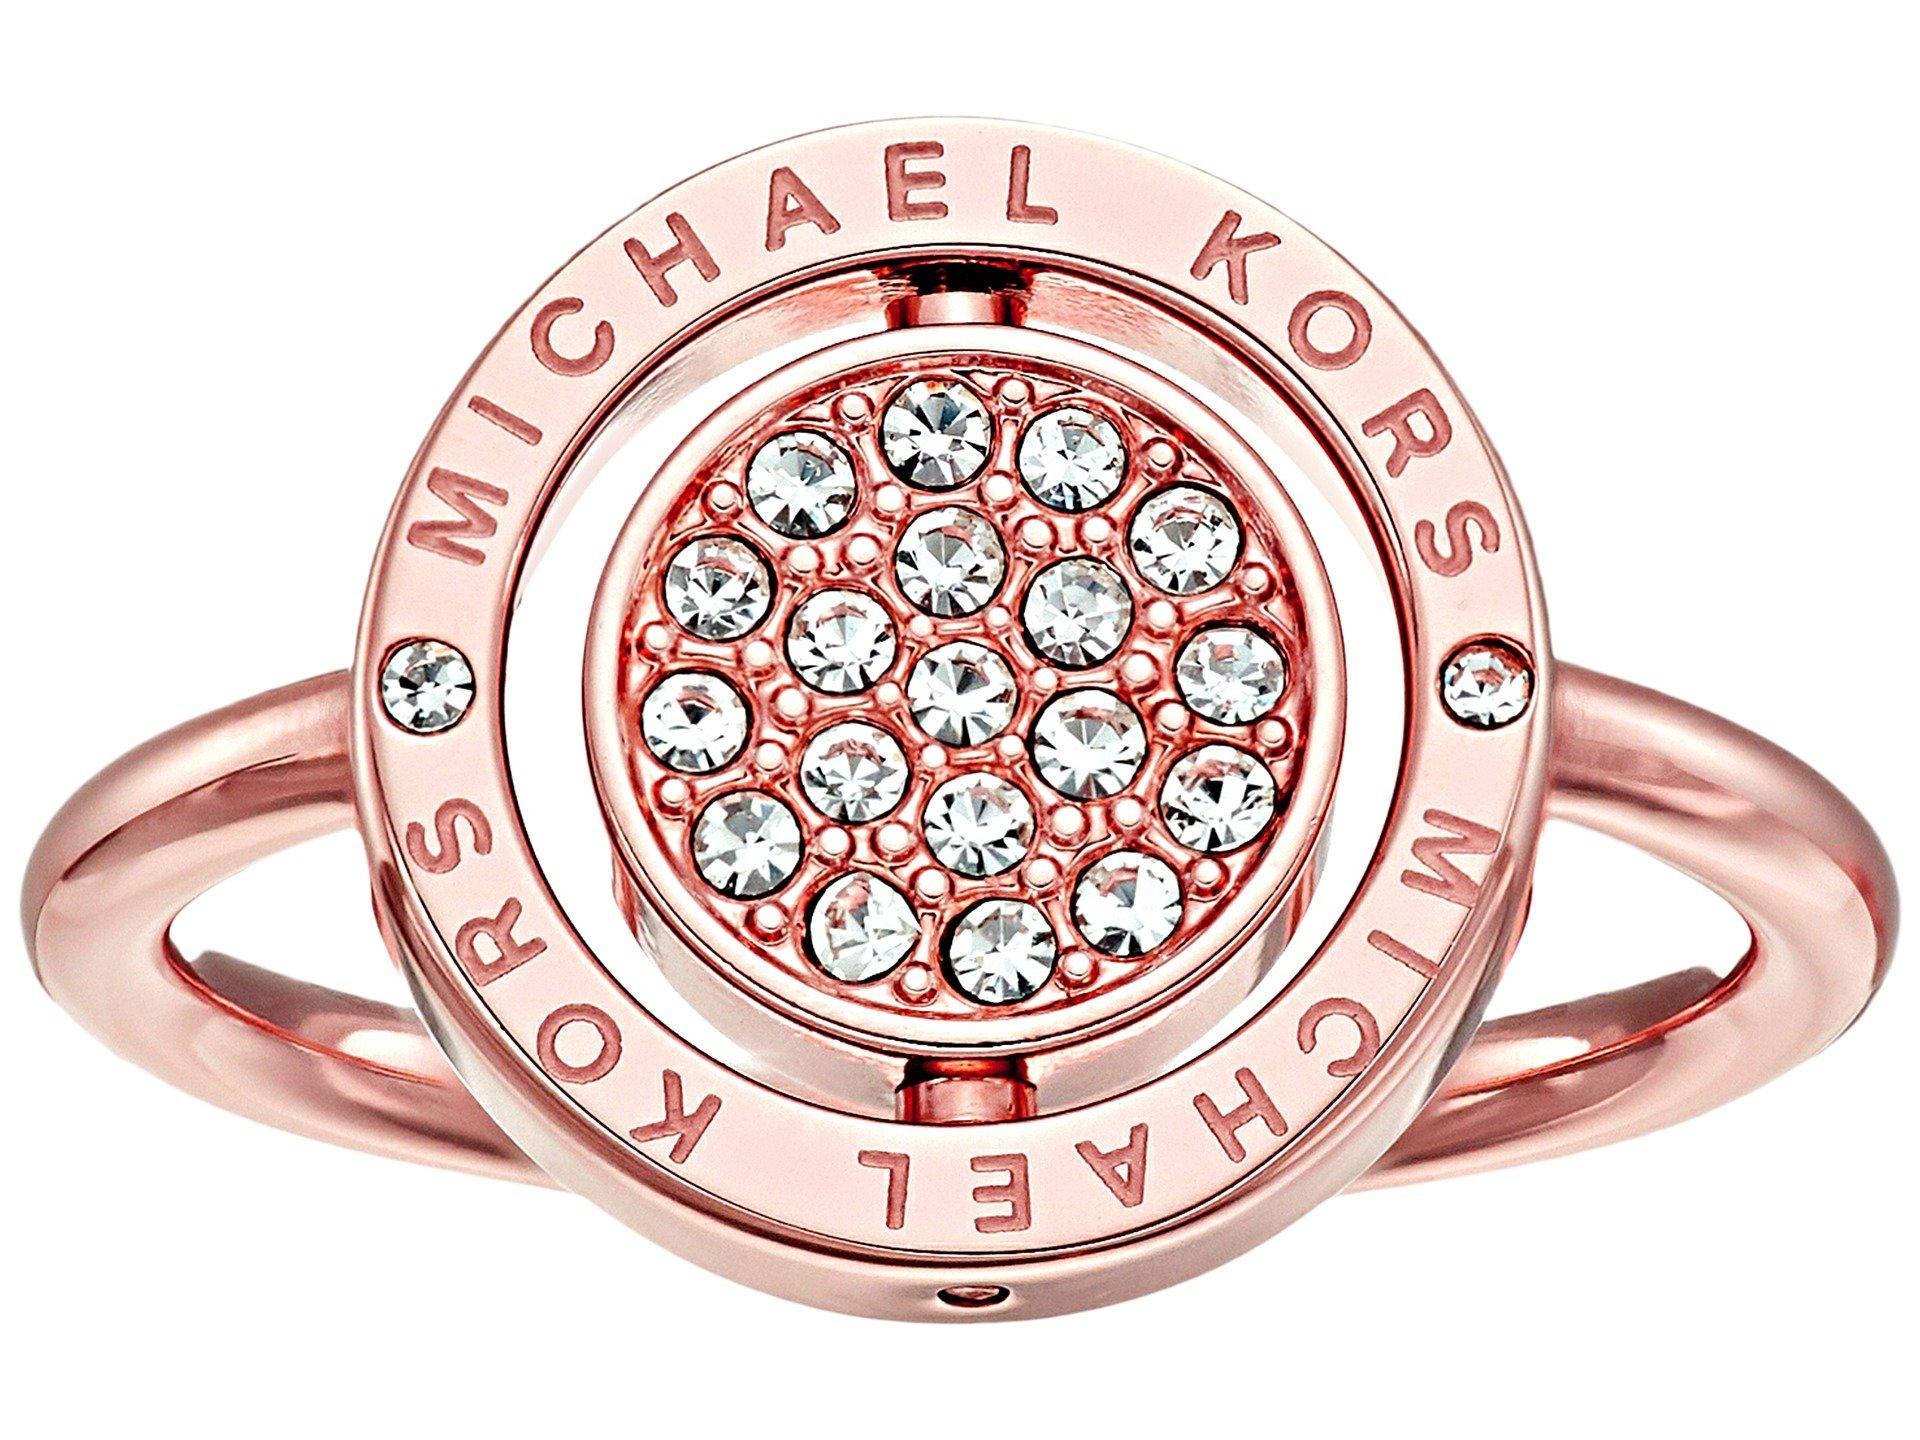 1920X1440 Michael Kors Wallpaper and Background